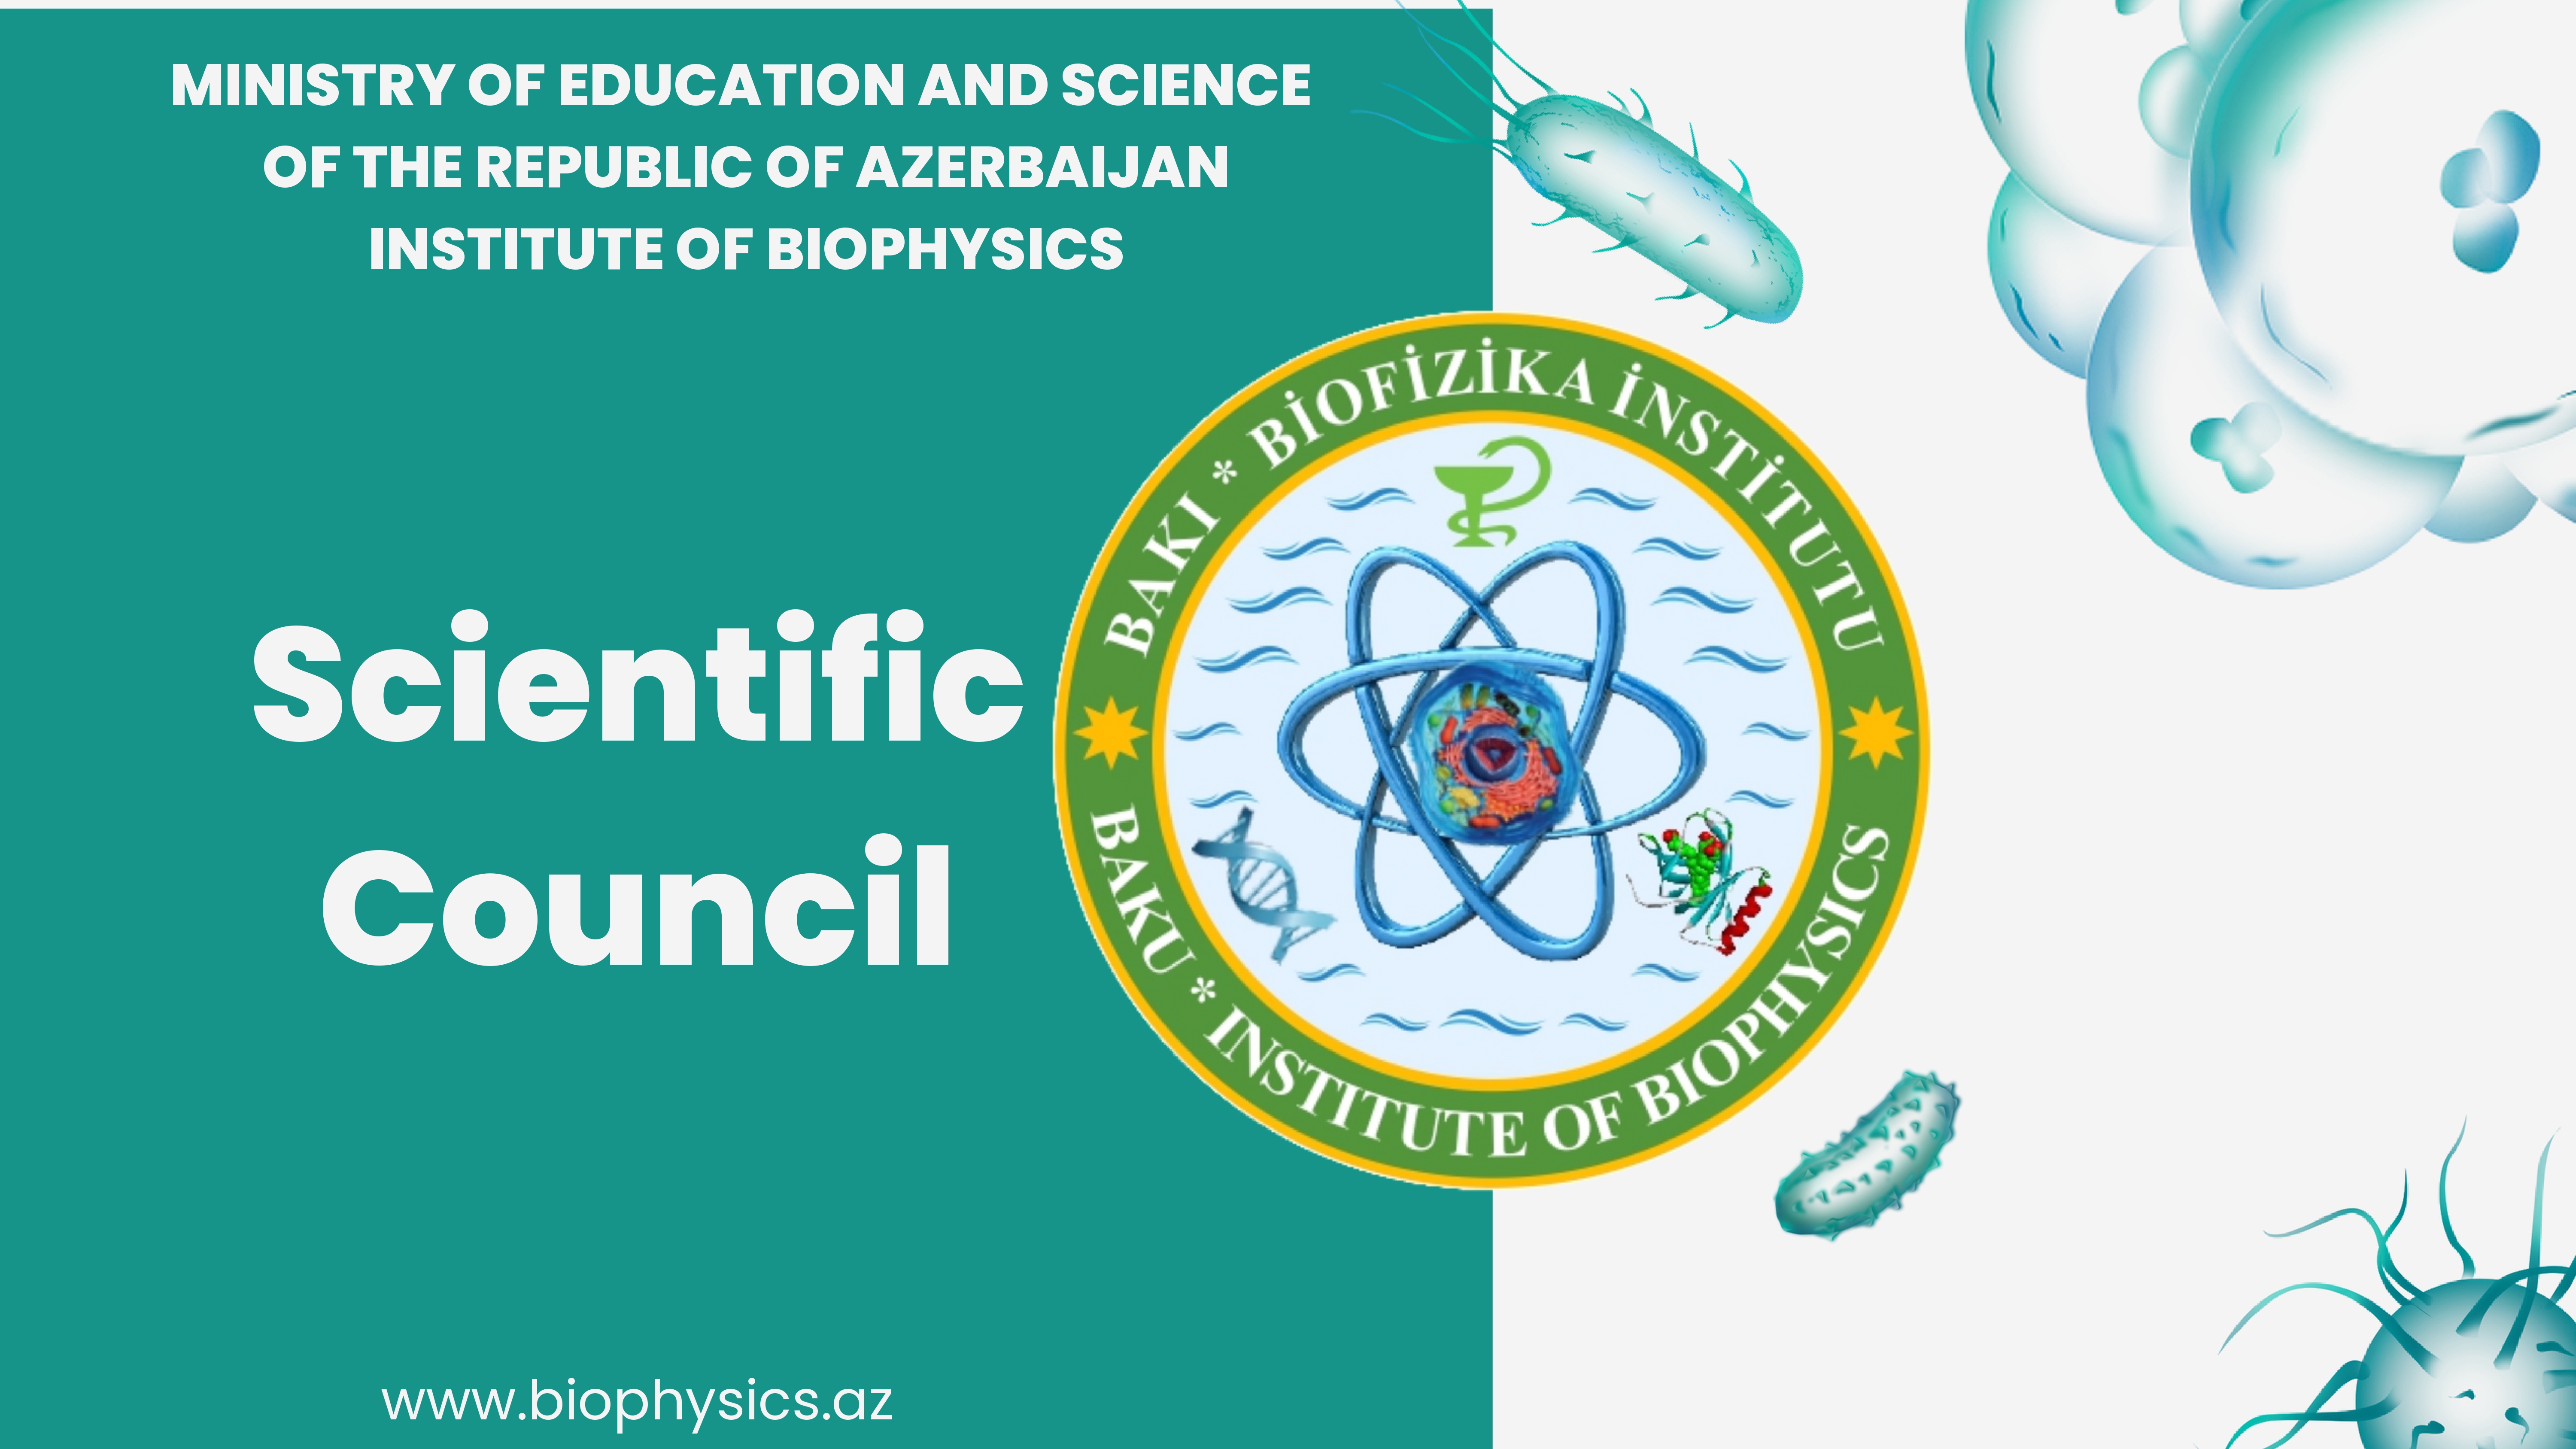 The next meeting of the Scientific Council will be held at the Institute of Biophysics